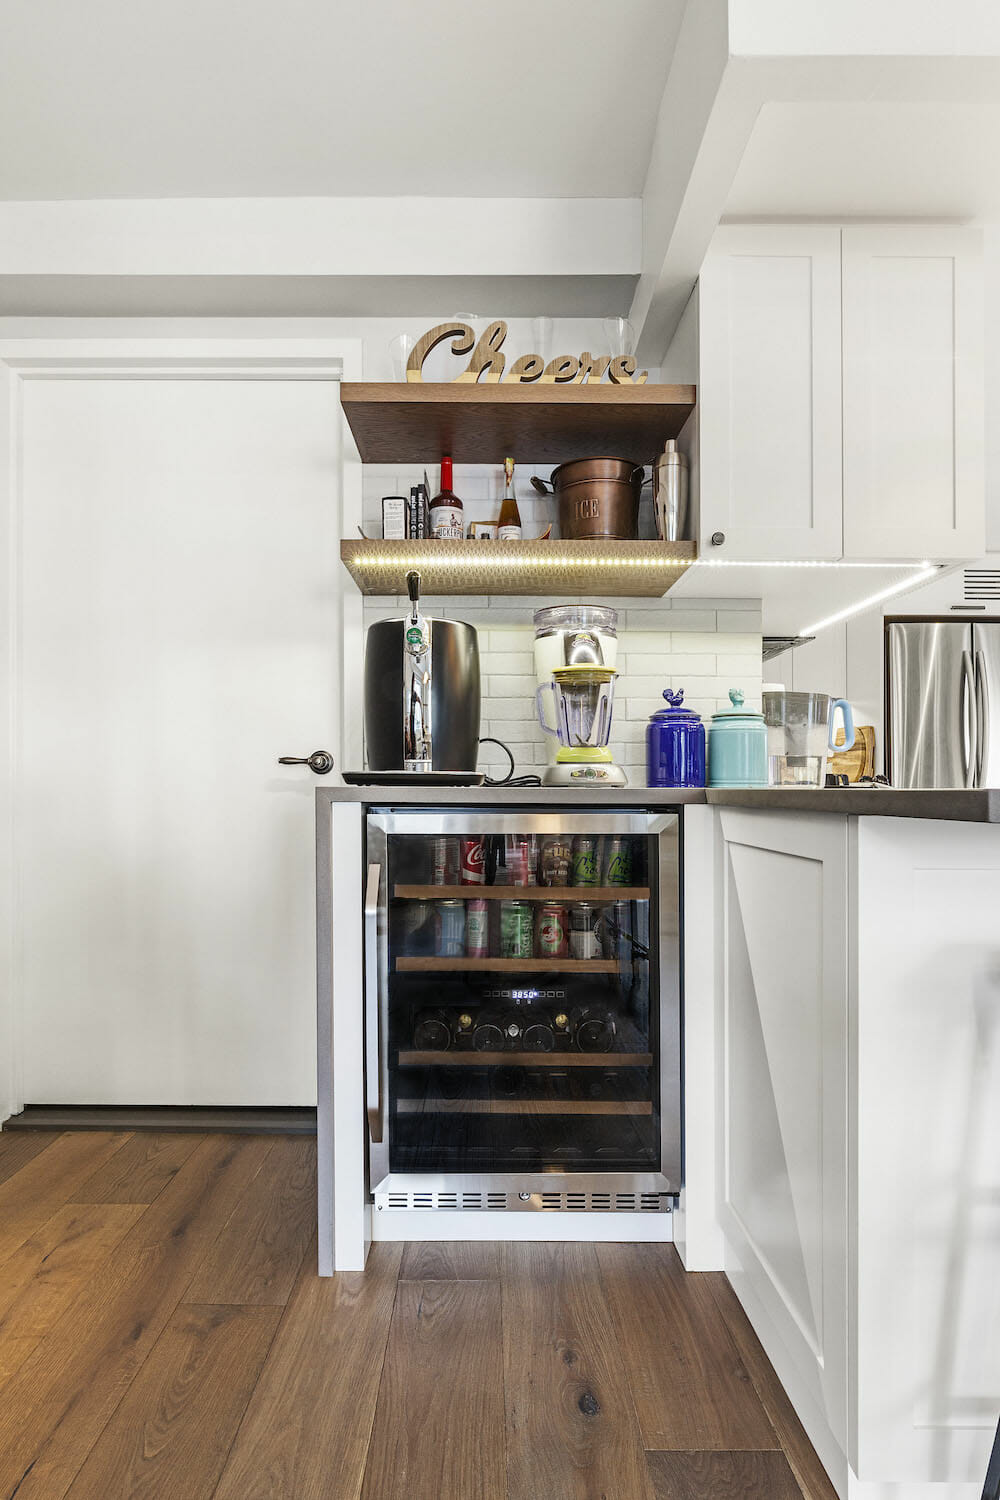 Image of a small wine fridge in kitchen nook